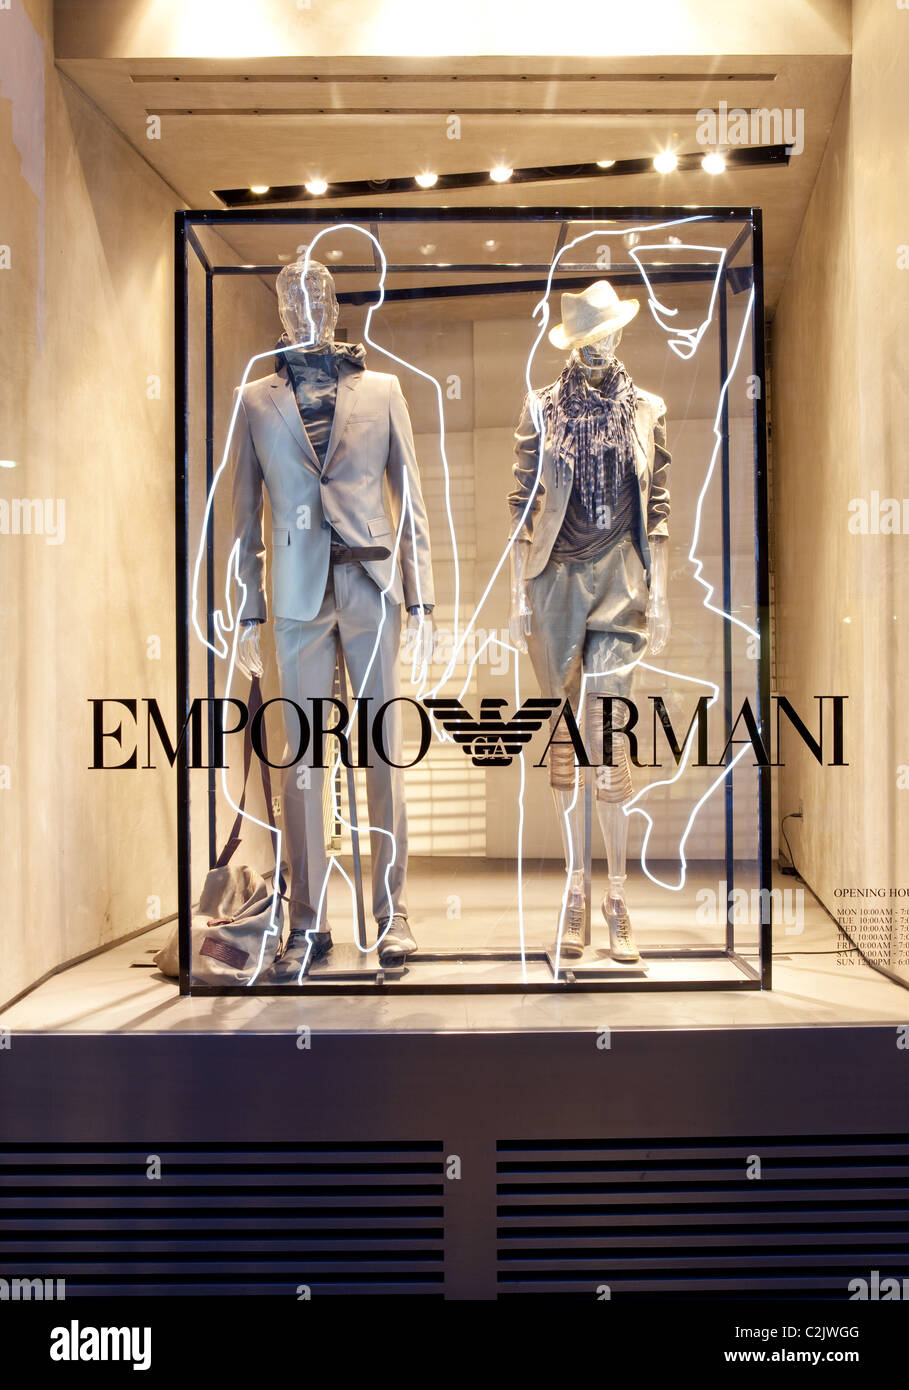 Armani store in London in the evening Stock Photo